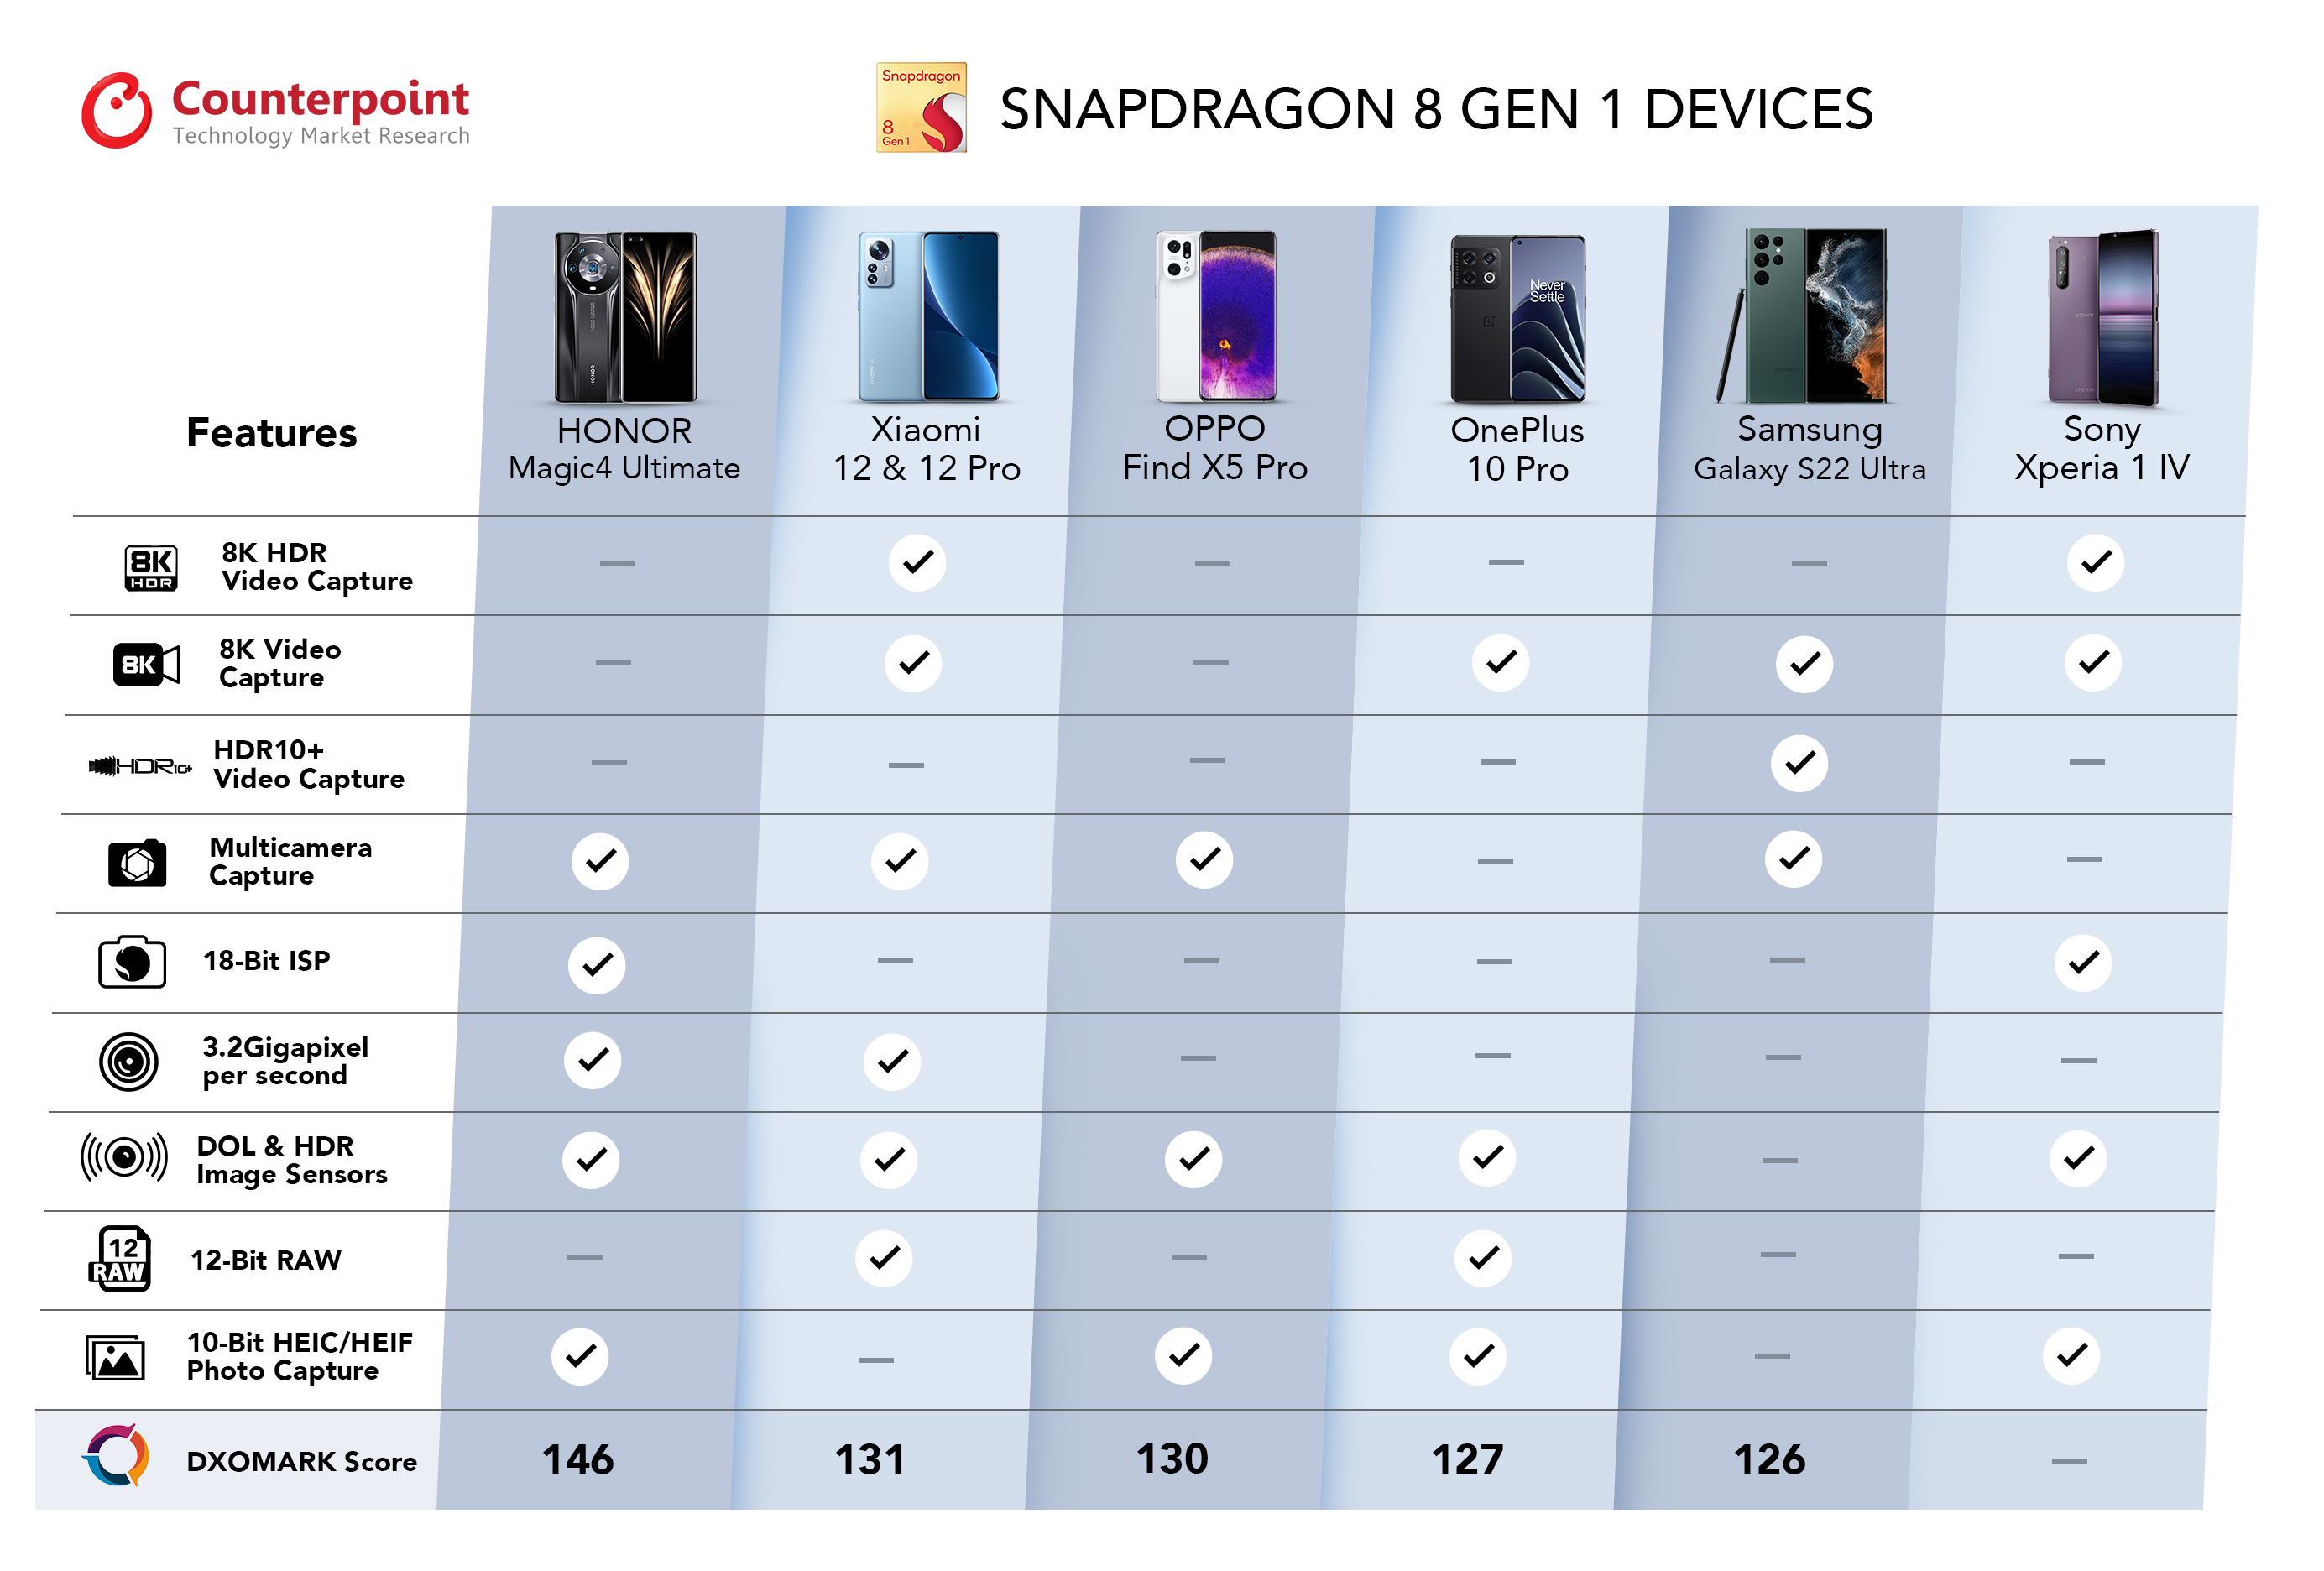 1st Gen Counterpoint Qualcomm Snapdragon 8 Devices